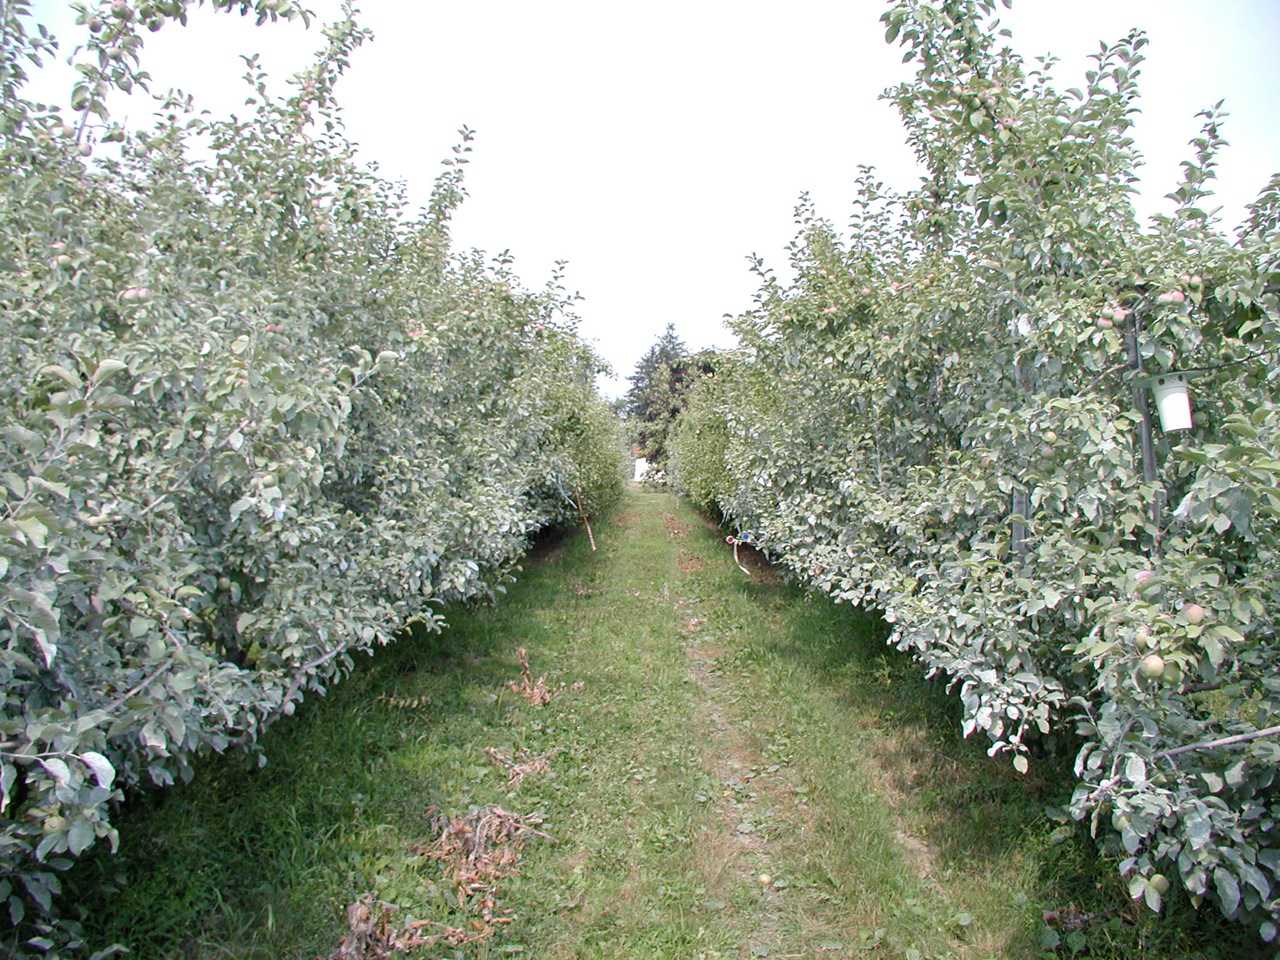 Growing The Eastern Organic Apple Is Possible - Growing Produce